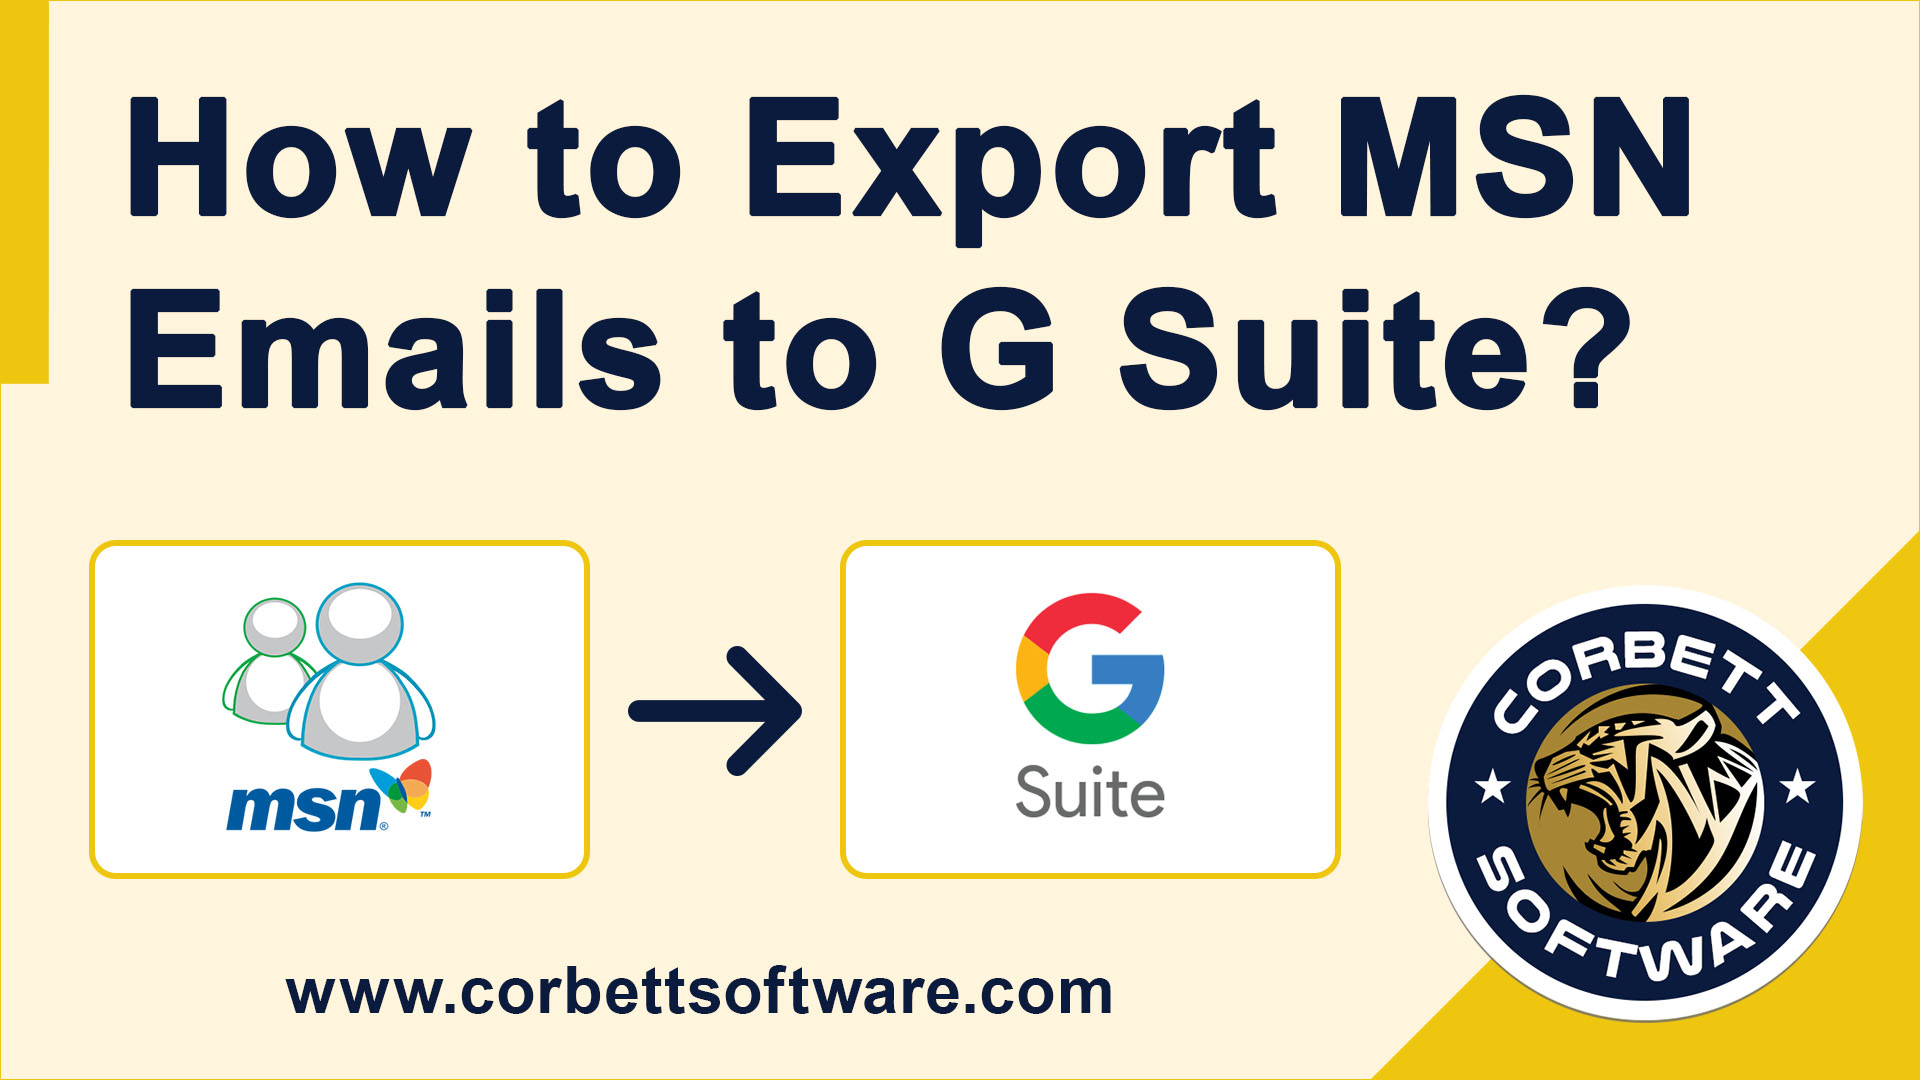 export MSN emails to G Suite